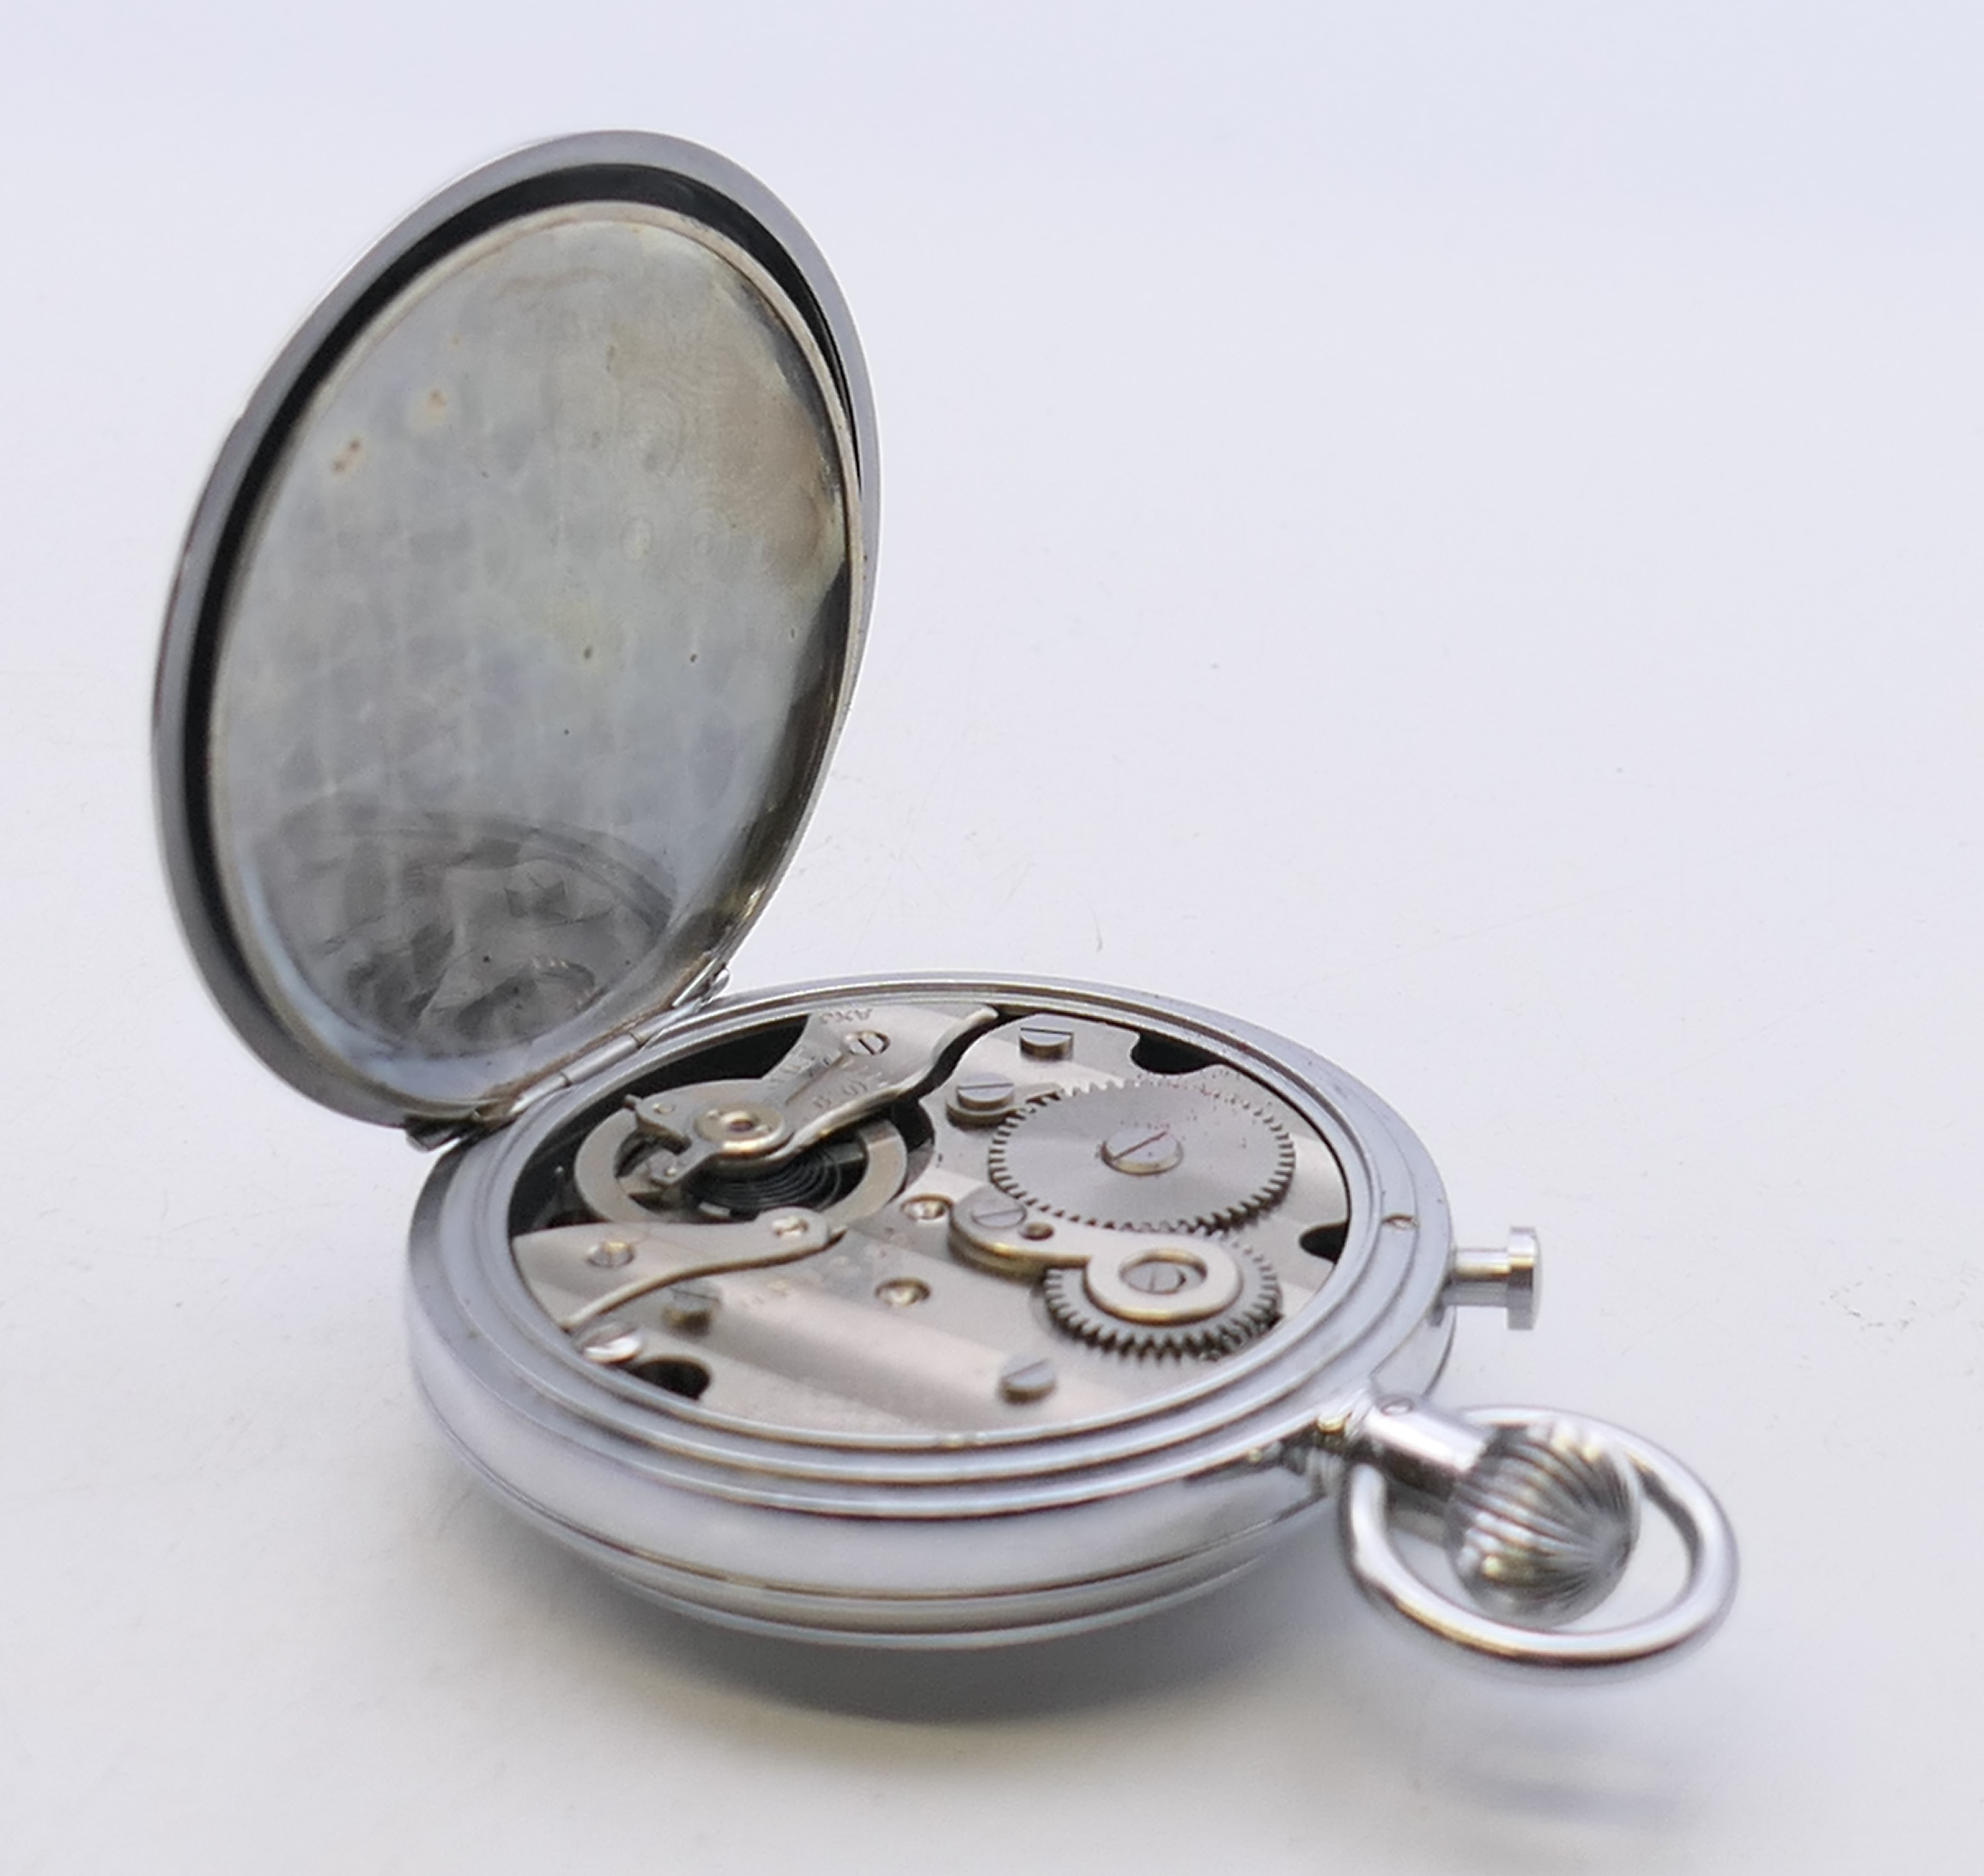 Two Art Deco gentleman's pocket watches, one marked Luxor, the other marked Premia Alfred Wolf Ltd, - Image 22 of 23